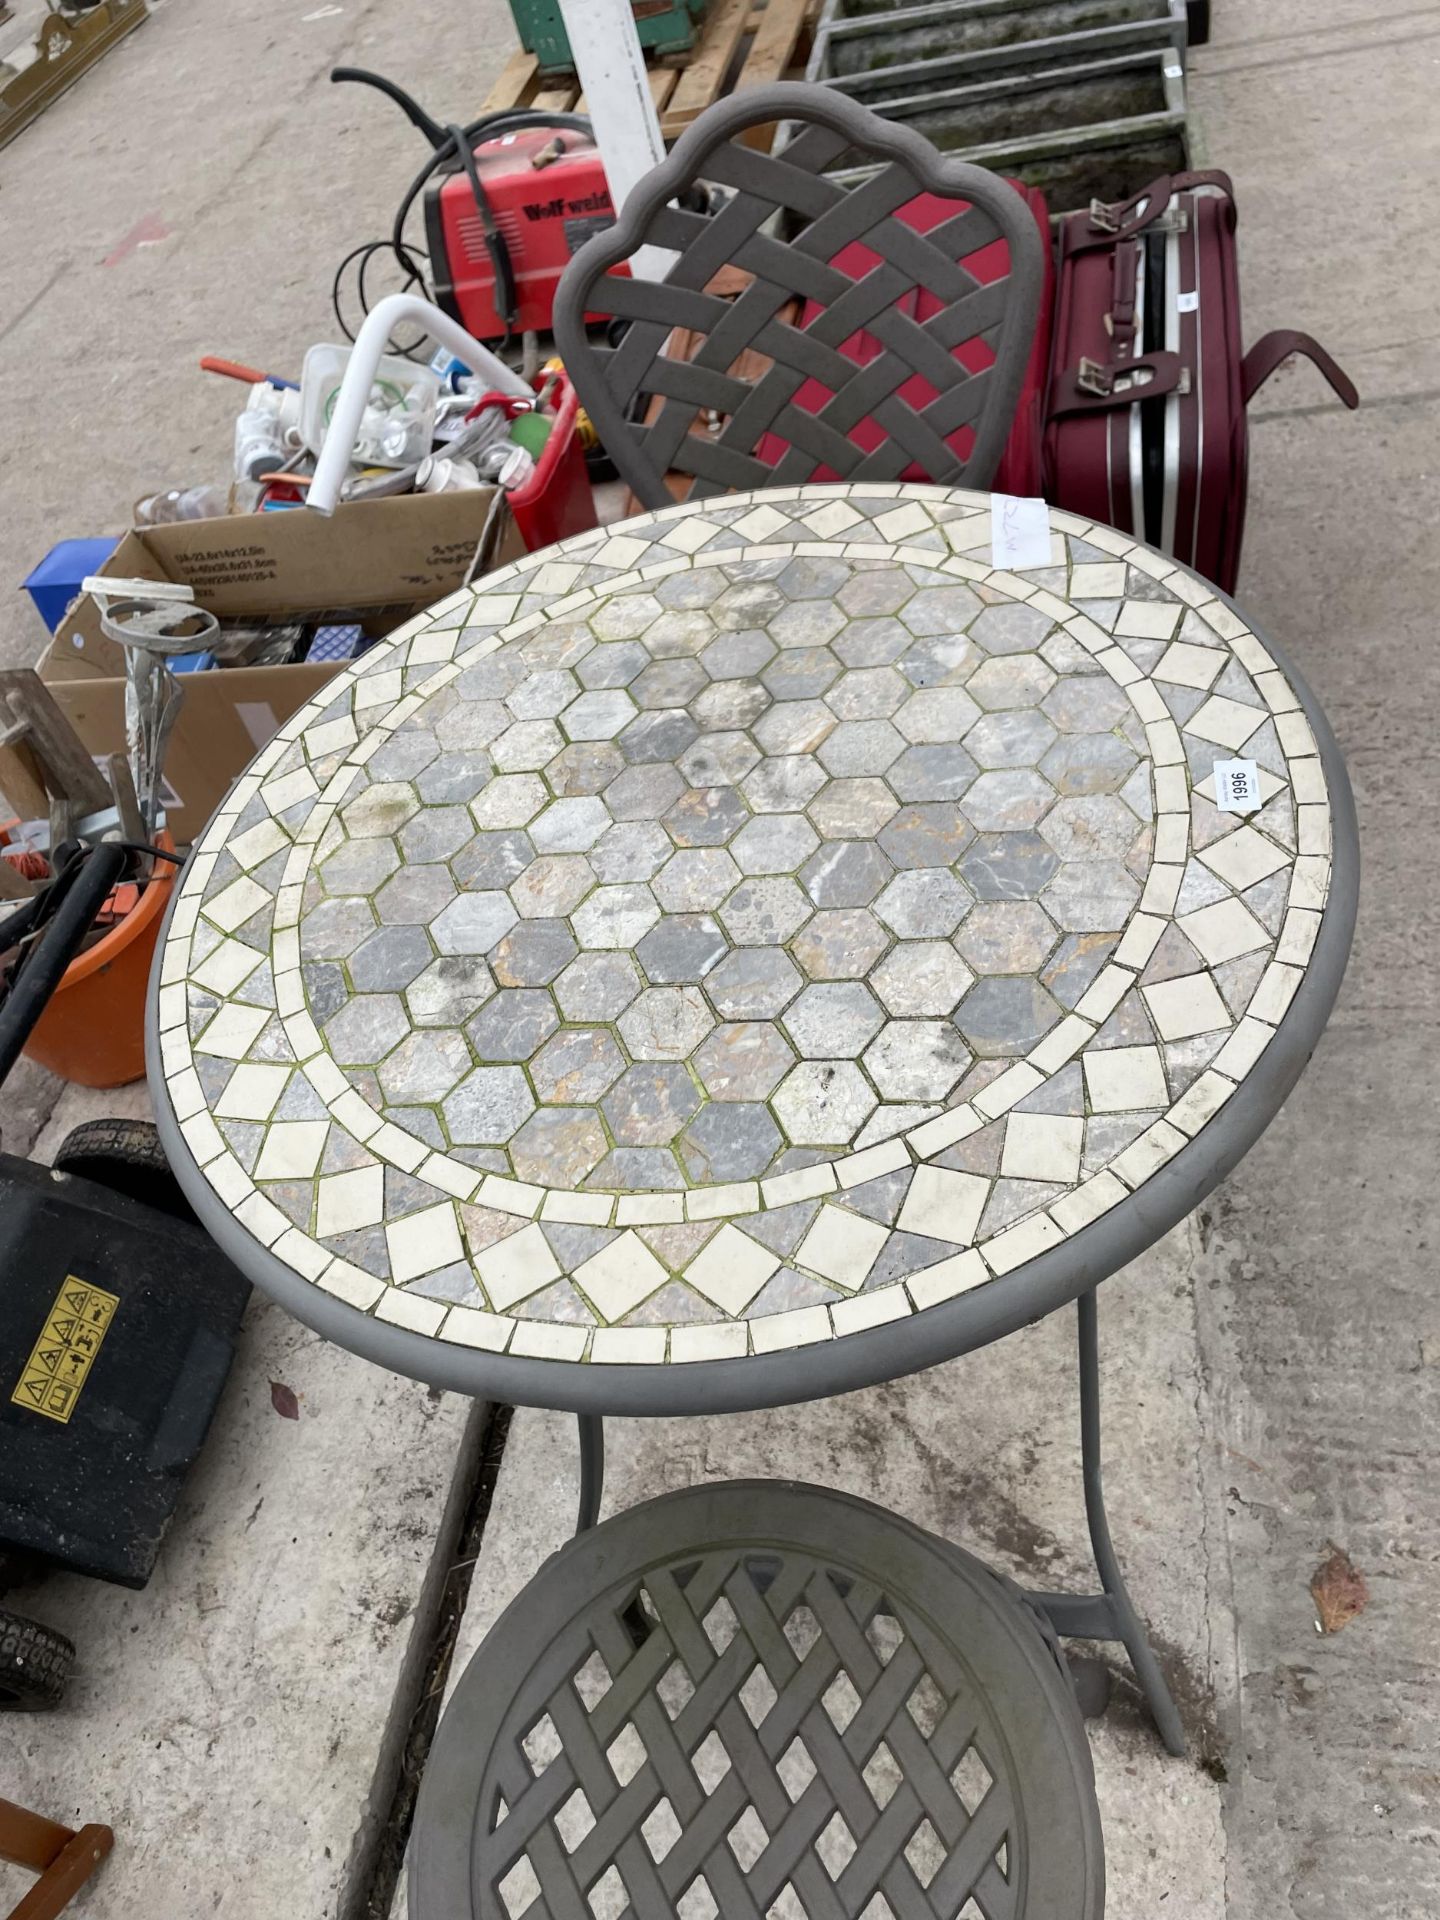 A METAL BISTRO SET COMPRISNG OF TWO CHAIRS AND A TILE TOP TABLE - Image 3 of 3